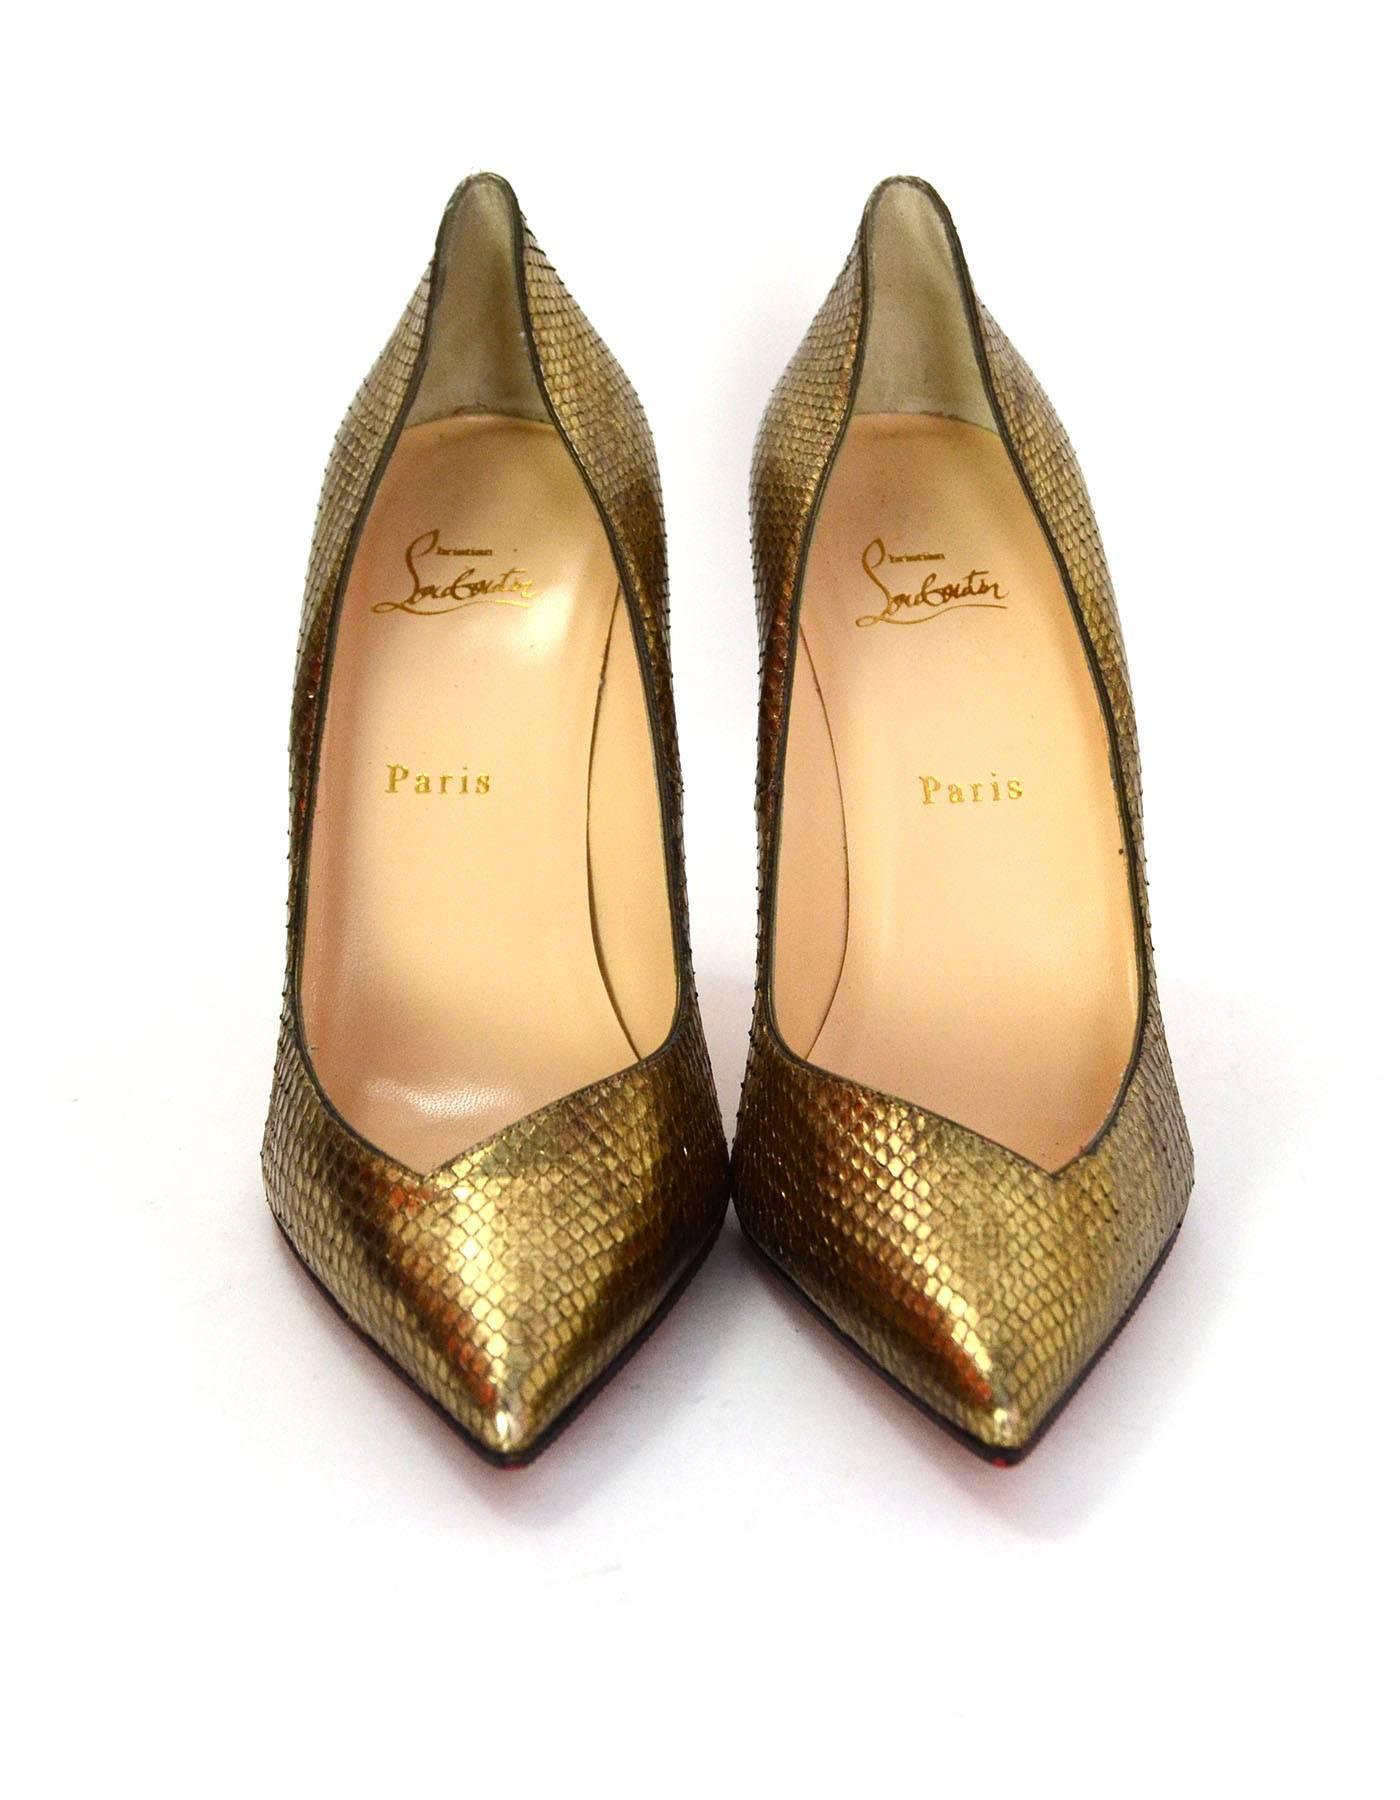 Christian Louboutin Antic Gold Python Completa 100 Pumps

Made In: Italy
Color: Antic gold
Materials: Python
Closure/Opening: Slide on
Sole Stamp: Christian Louboutin Made in Italy 42
Overall Condition: Very good pre-owned condition, have